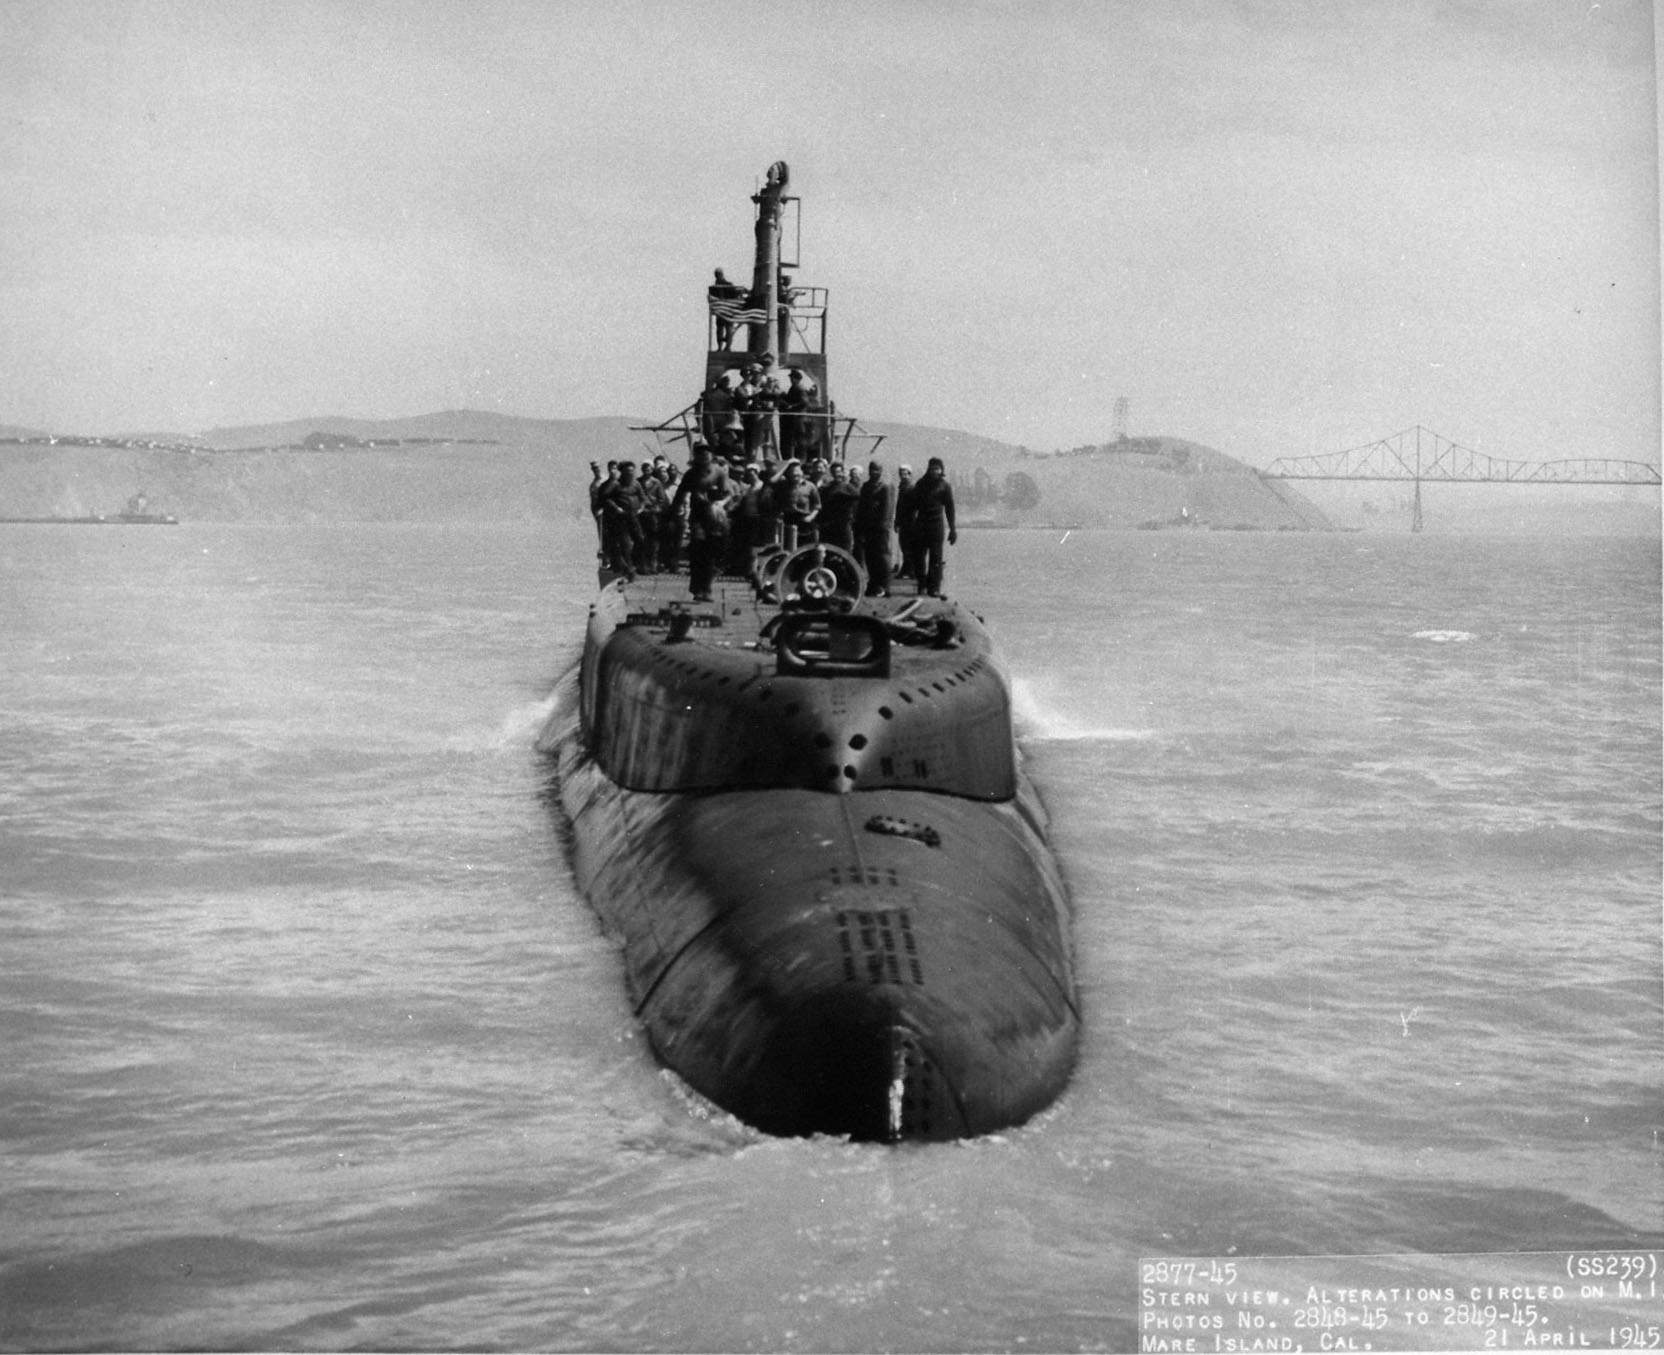 Stern view of USS Whale off Mare Island Navy Yard, Vallejo, California, United States, 21 Apr 1945